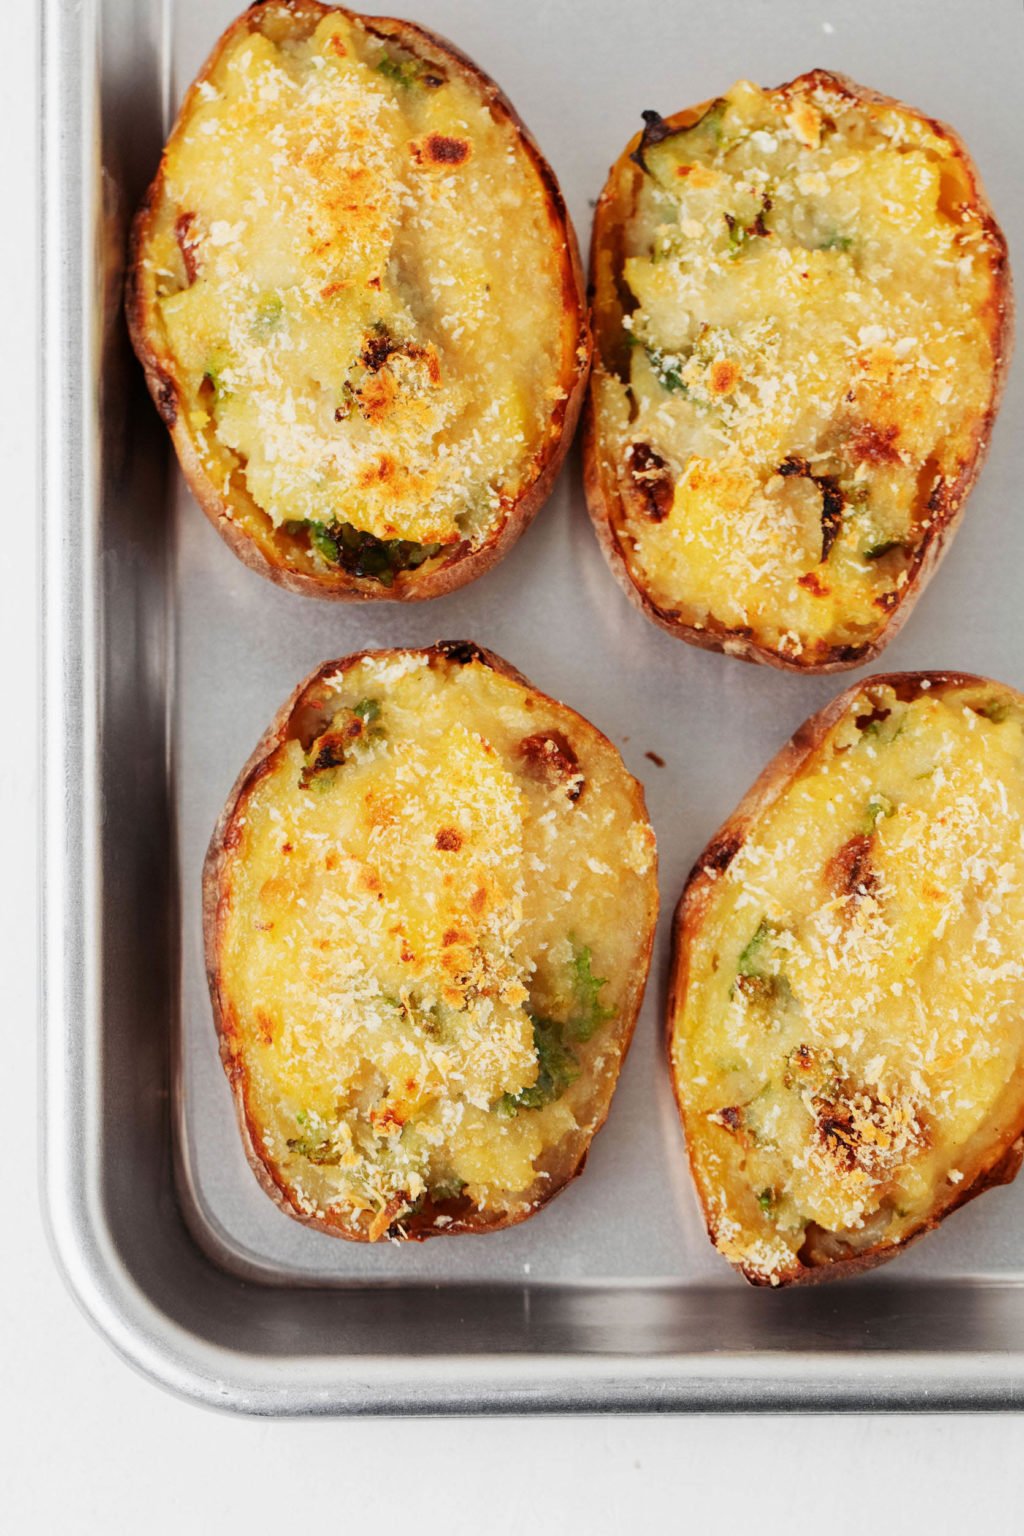 A metal baking sheet is lined with loaded, garlic kale potatoes.